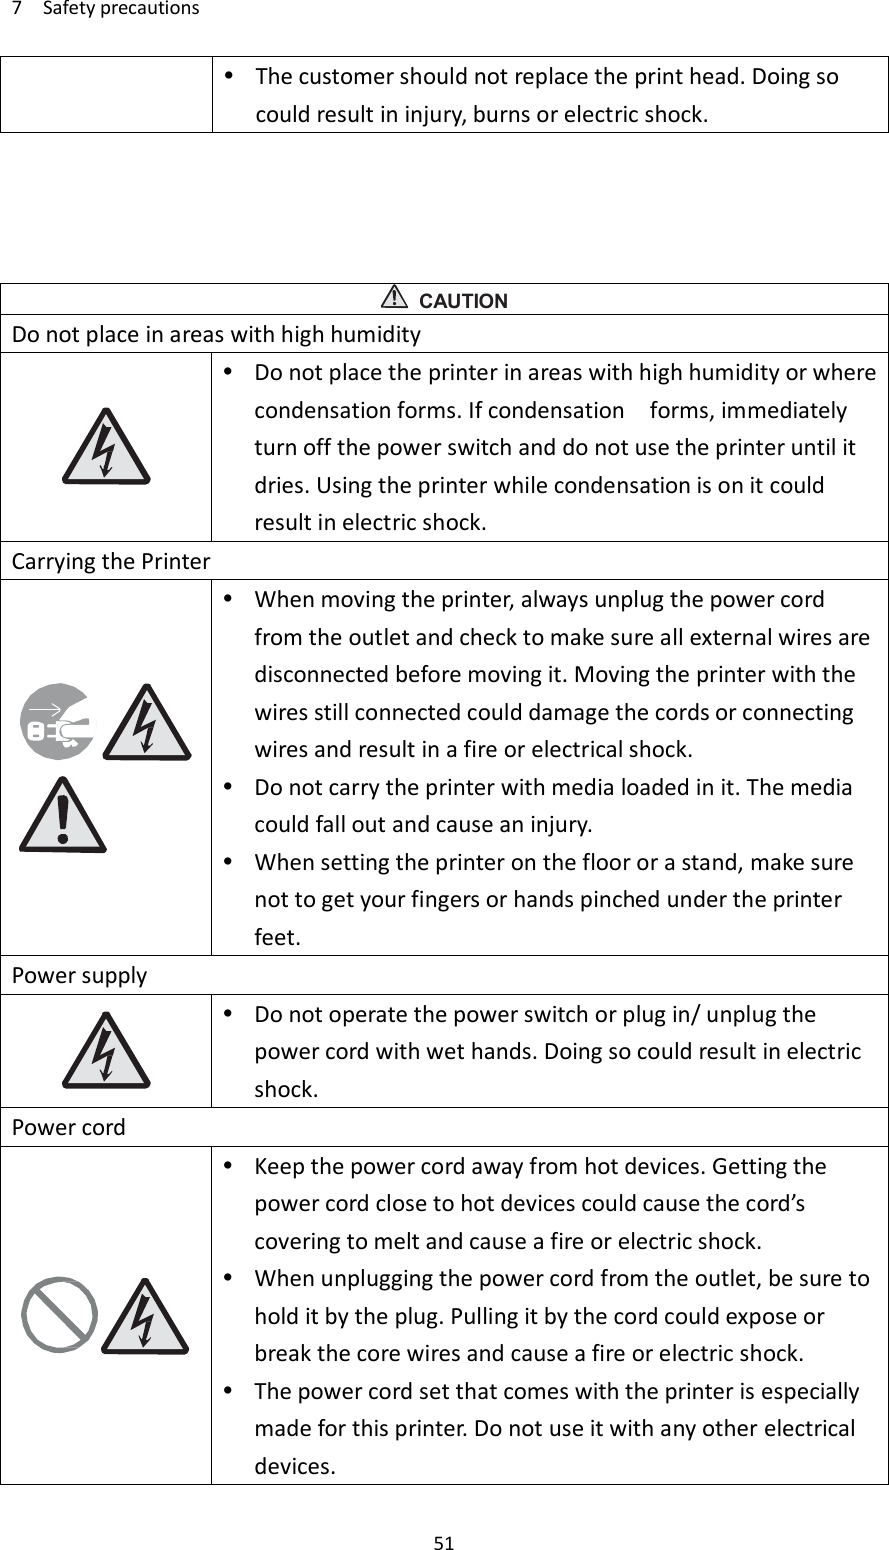 7    Safety precautions     51  The customer should not replace the print head. Doing so could result in injury, burns or electric shock.      CAUTION Do not place in areas with high humidity   Do not place the printer in areas with high humidity or where condensation forms. If condensation    forms, immediately turn off the power switch and do not use the printer until it dries. Using the printer while condensation is on it could result in electric shock. Carrying the Printer   When moving the printer, always unplug the power cord from the outlet and check to make sure all external wires are disconnected before moving it. Moving the printer with the wires still connected could damage the cords or connecting wires and result in a fire or electrical shock.  Do not carry the printer with media loaded in it. The media could fall out and cause an injury.  When setting the printer on the floor or a stand, make sure not to get your fingers or hands pinched under the printer feet. Power supply   Do not operate the power switch or plug in/ unplug the power cord with wet hands. Doing so could result in electric shock. Power cord   Keep the power cord away from hot devices. Getting the power cord close to hot devices could cause the cord’s covering to melt and cause a fire or electric shock.  When unplugging the power cord from the outlet, be sure to hold it by the plug. Pulling it by the cord could expose or break the core wires and cause a fire or electric shock.  The power cord set that comes with the printer is especially made for this printer. Do not use it with any other electrical devices. 